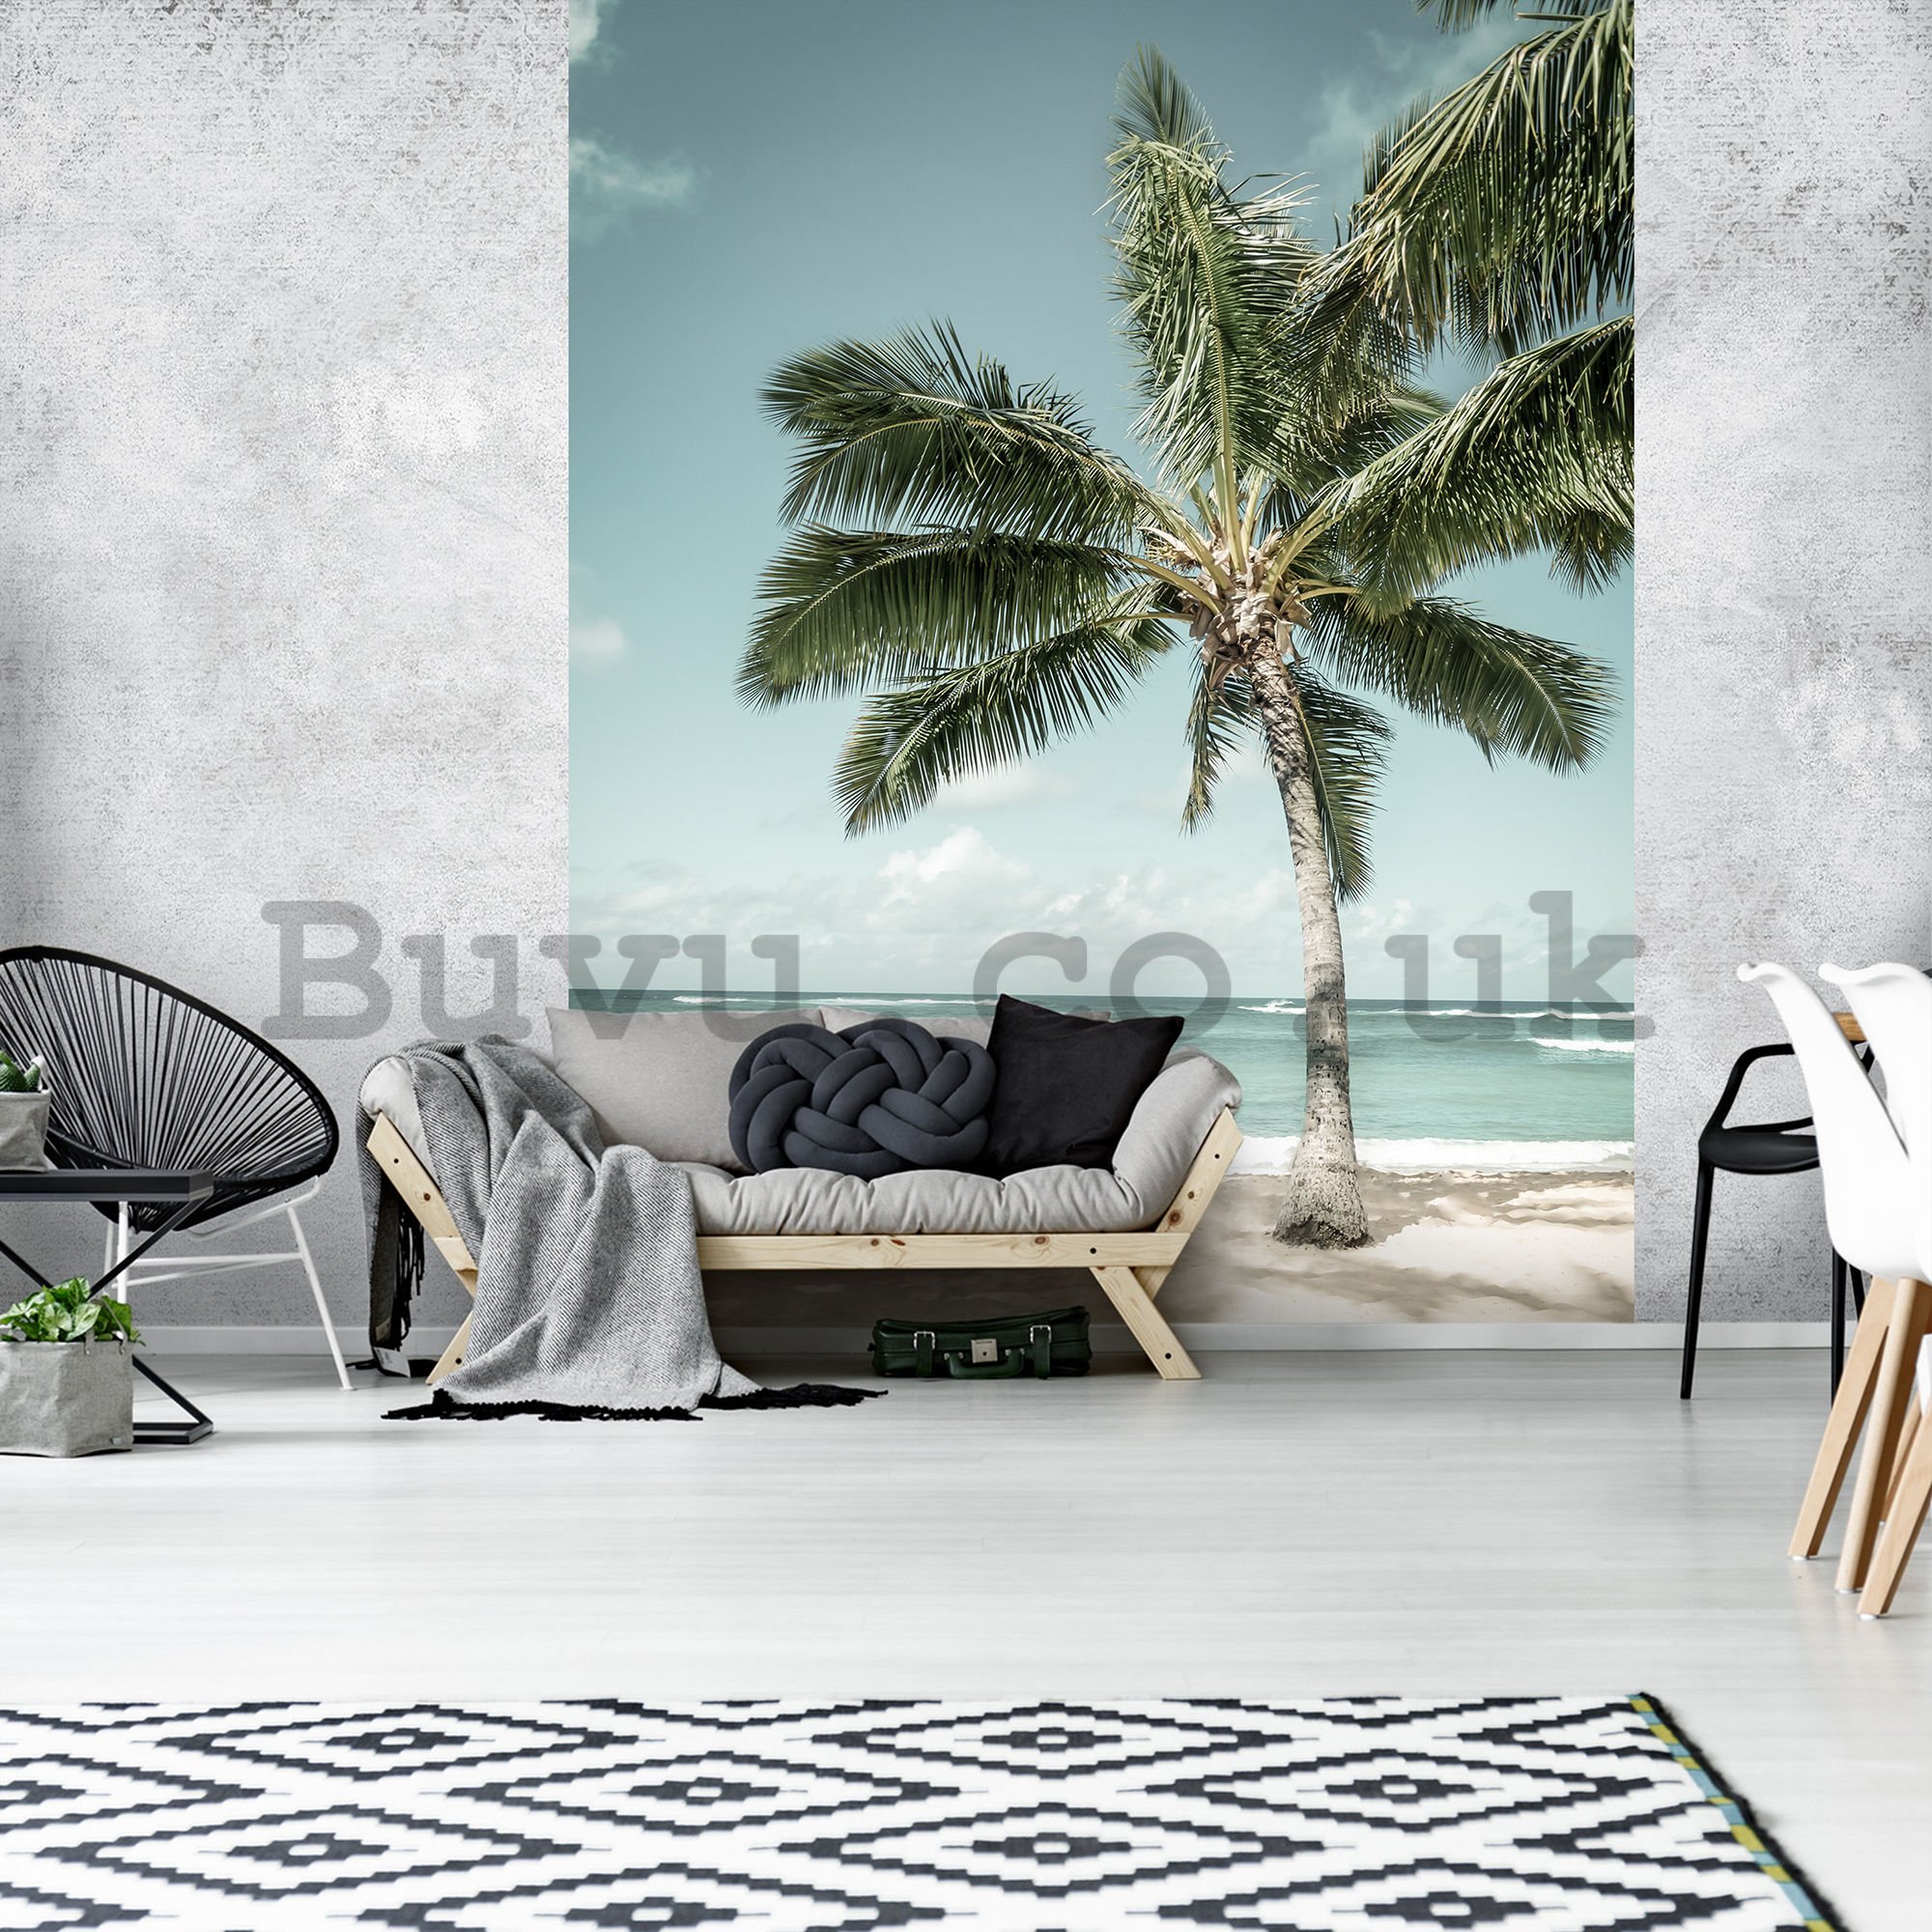 Wall mural: Palm tree by the sea - 254x184 cm